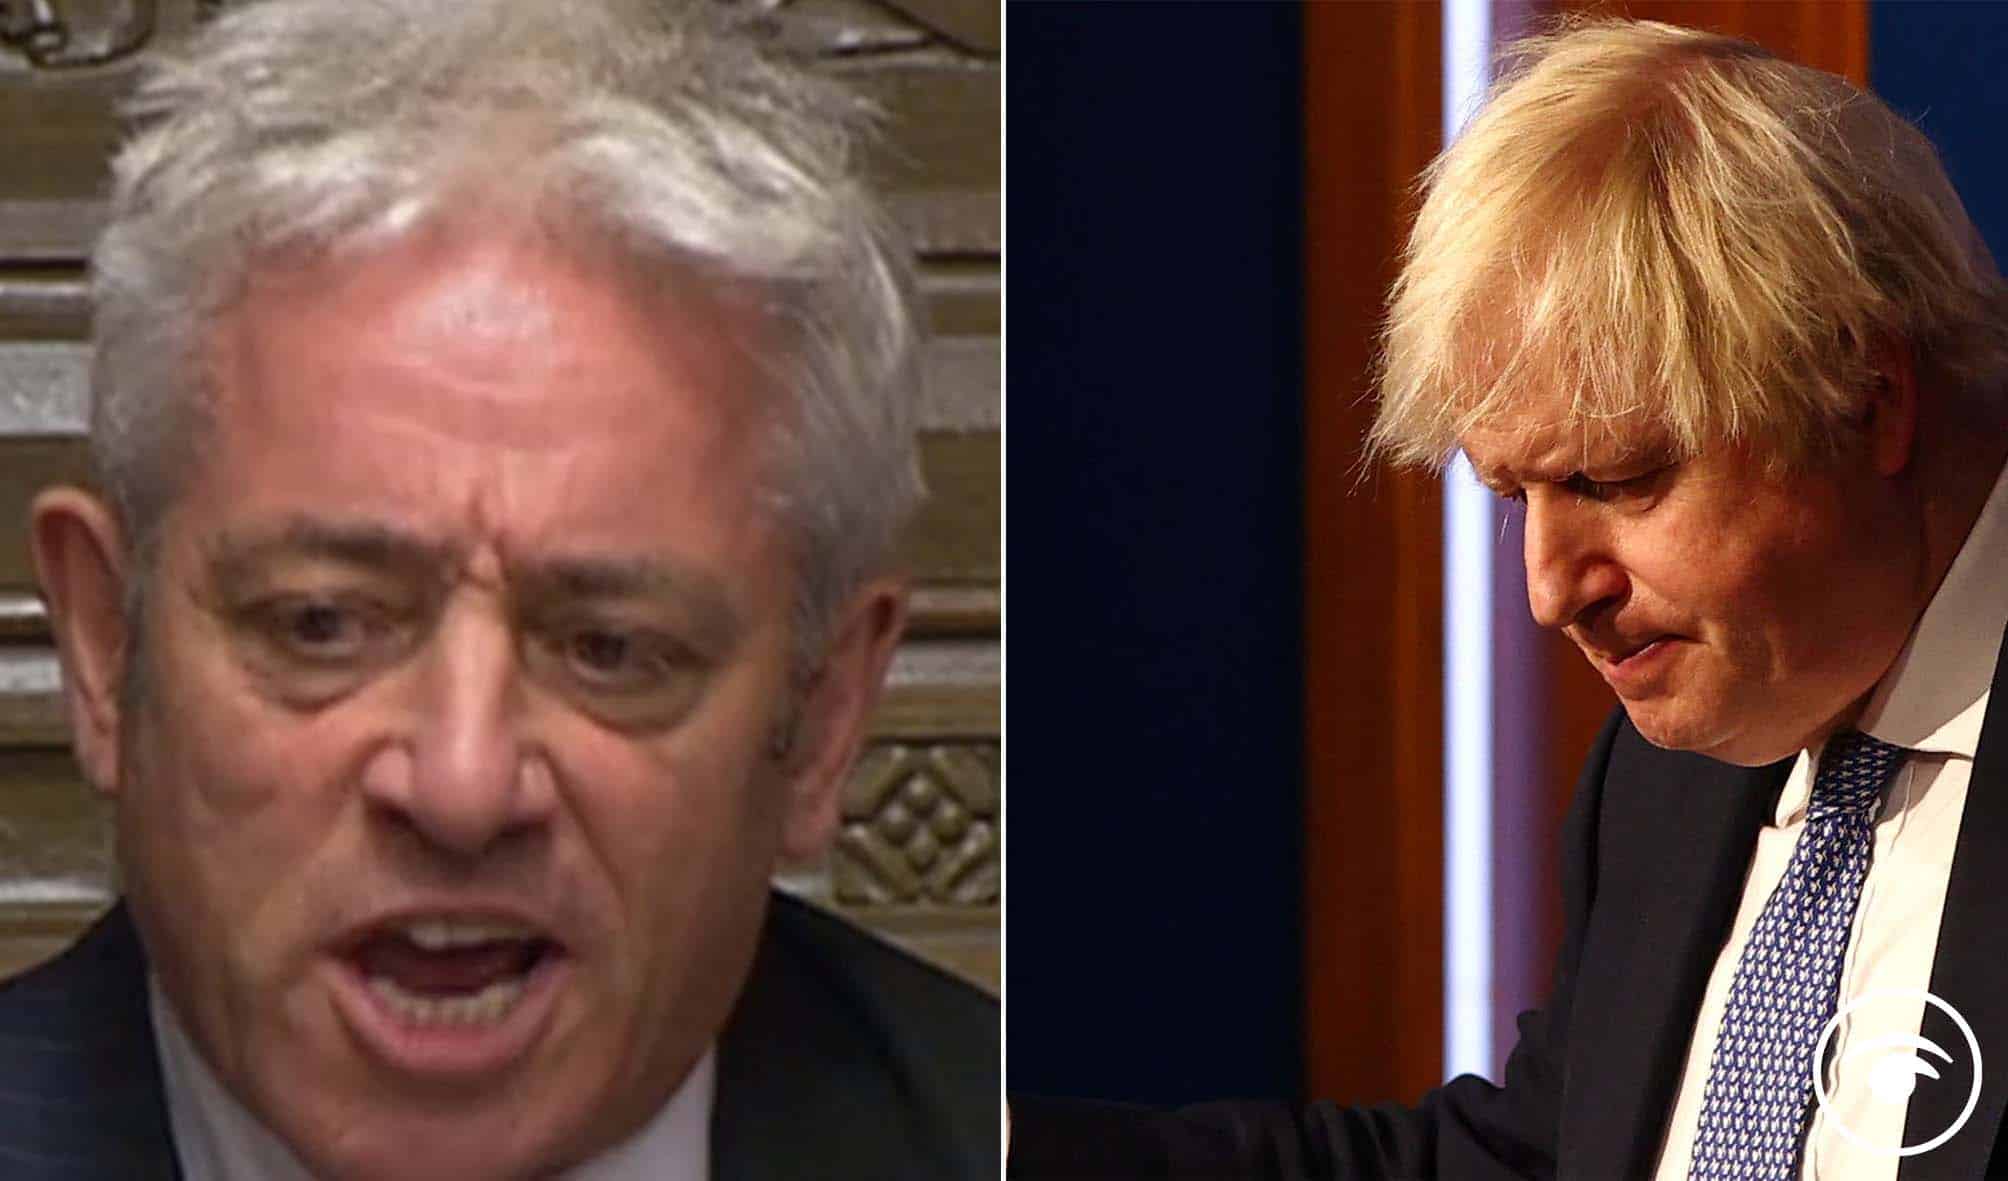 Watch: Furious Bercow slams Johnson on GMB, saying PM ‘stinks in the nostrils of decent people’